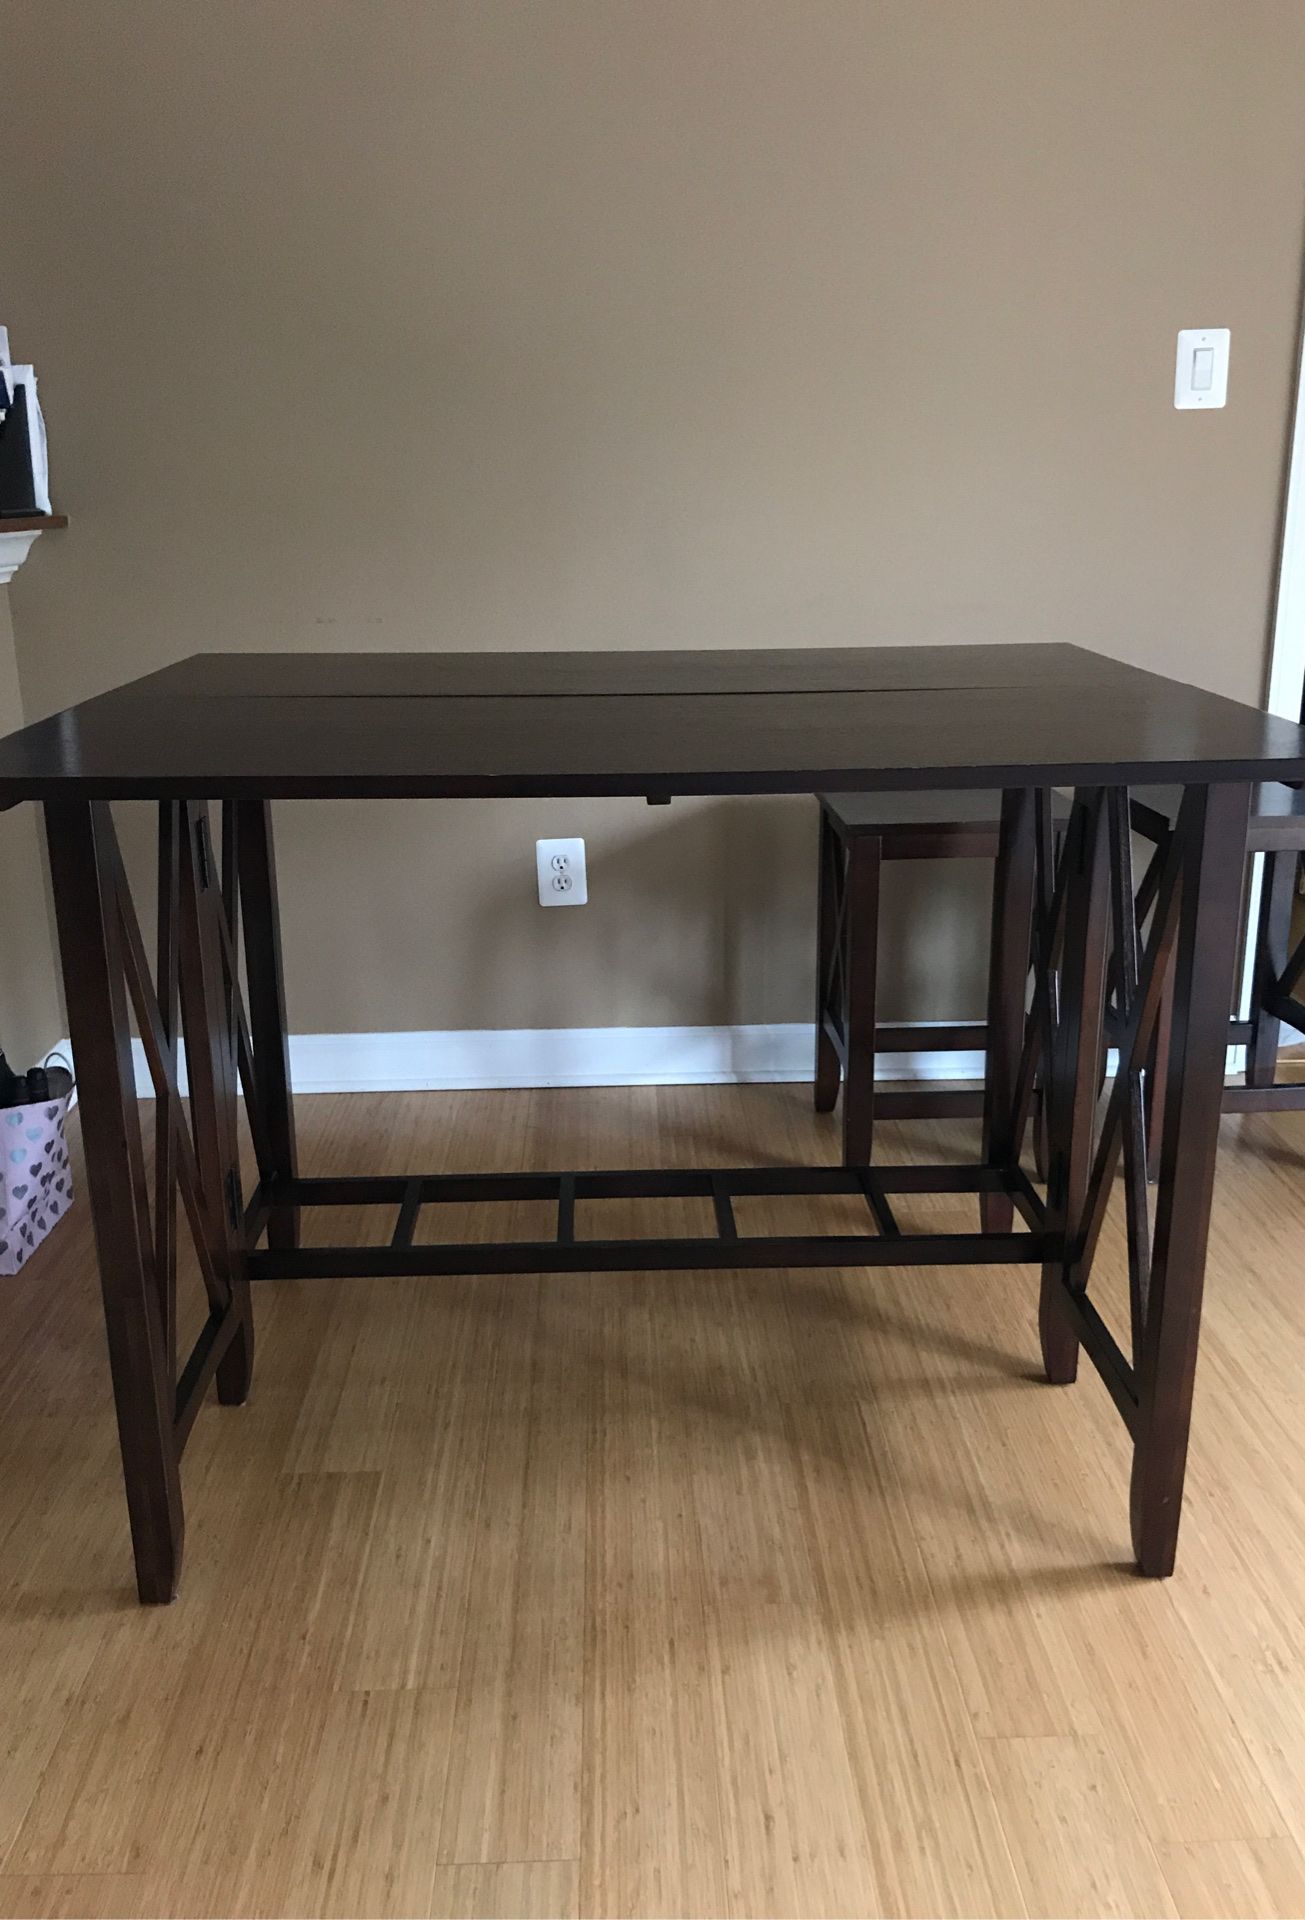 Pier 1 Imports - Extendable Wooden Table w/ 2 stools